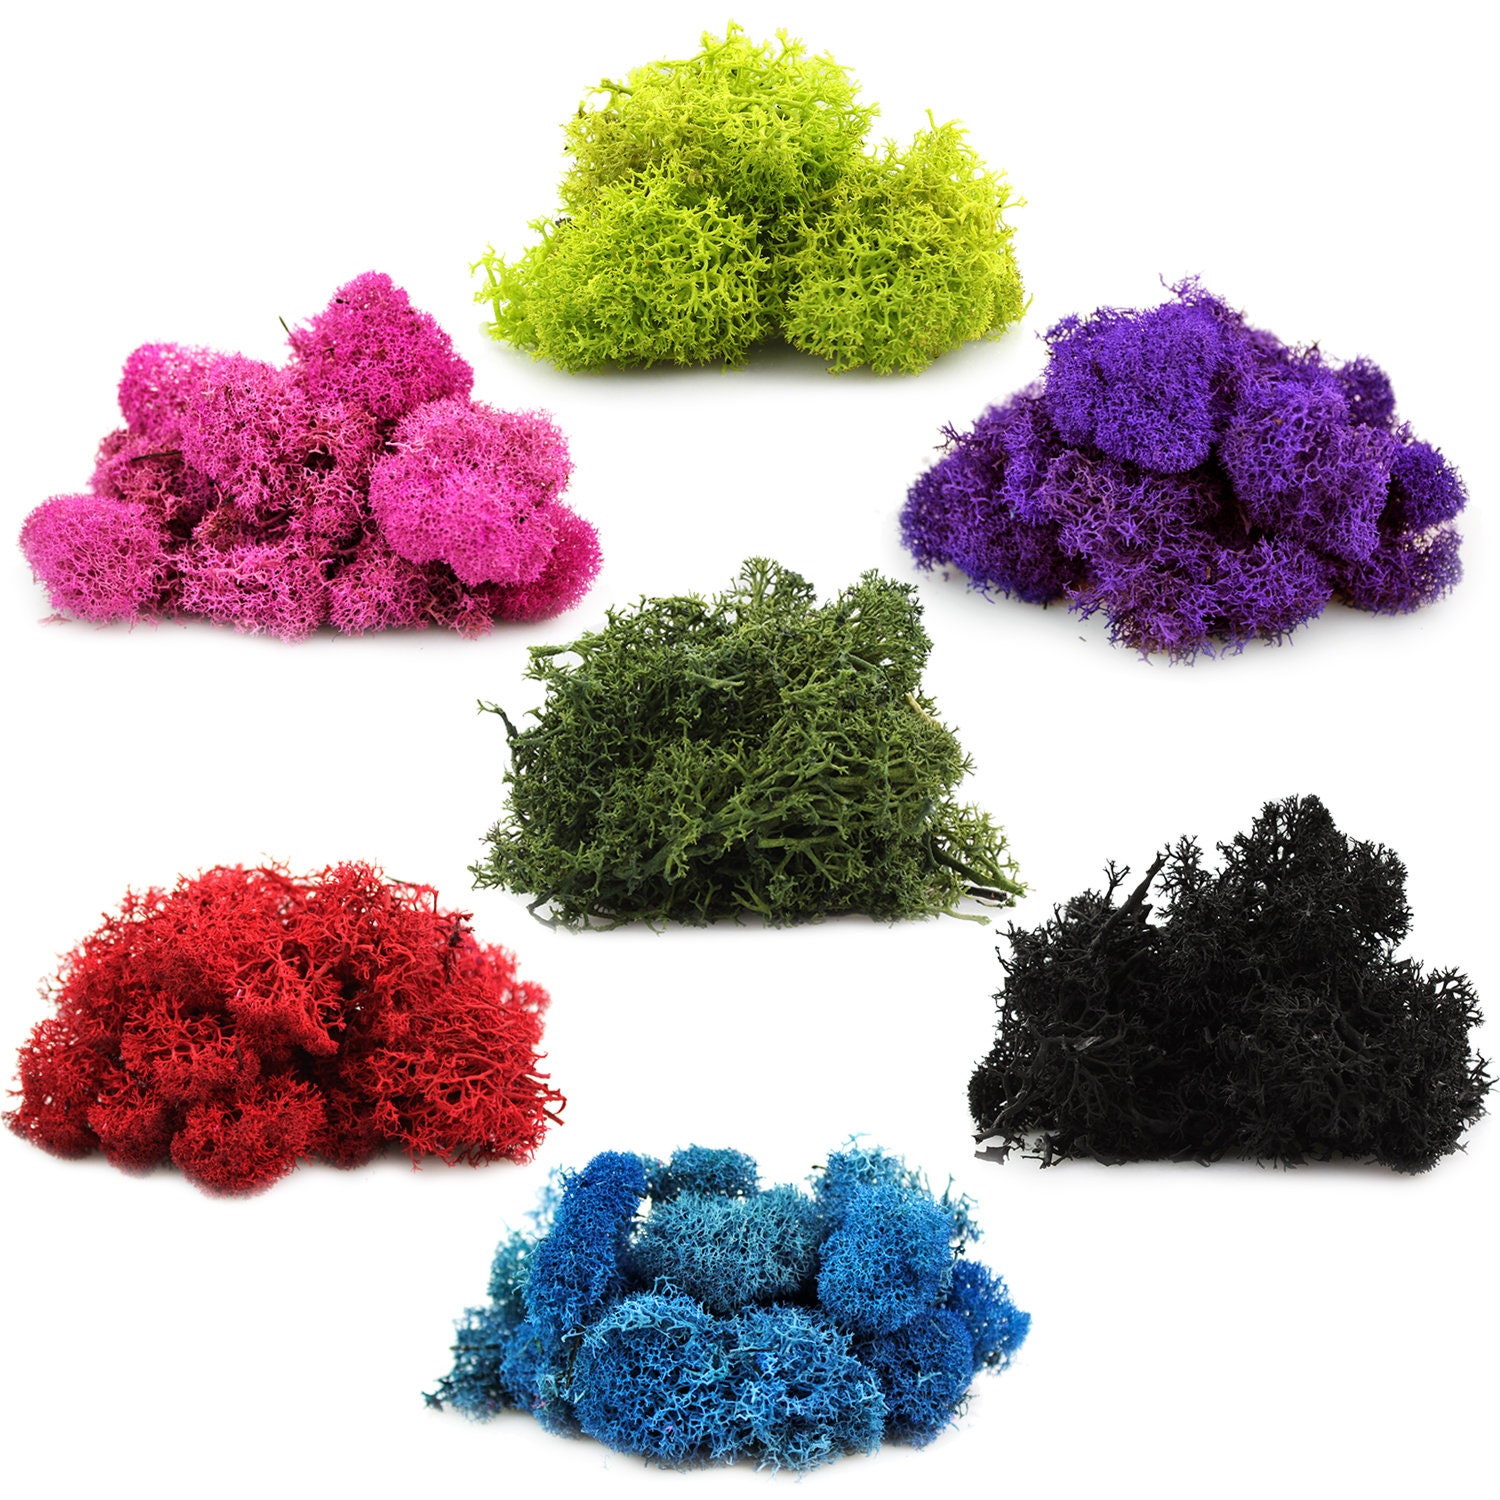  Preserved Moss Reindeer Moss Natural Dried Multicolored Floral  Moss Bulk Moss for Crafts DIY Arts Wall Home Office Terrariums Wedding  Centerpieces Decoration (Vivid Colors,4.63 lb) : Arts, Crafts & Sewing